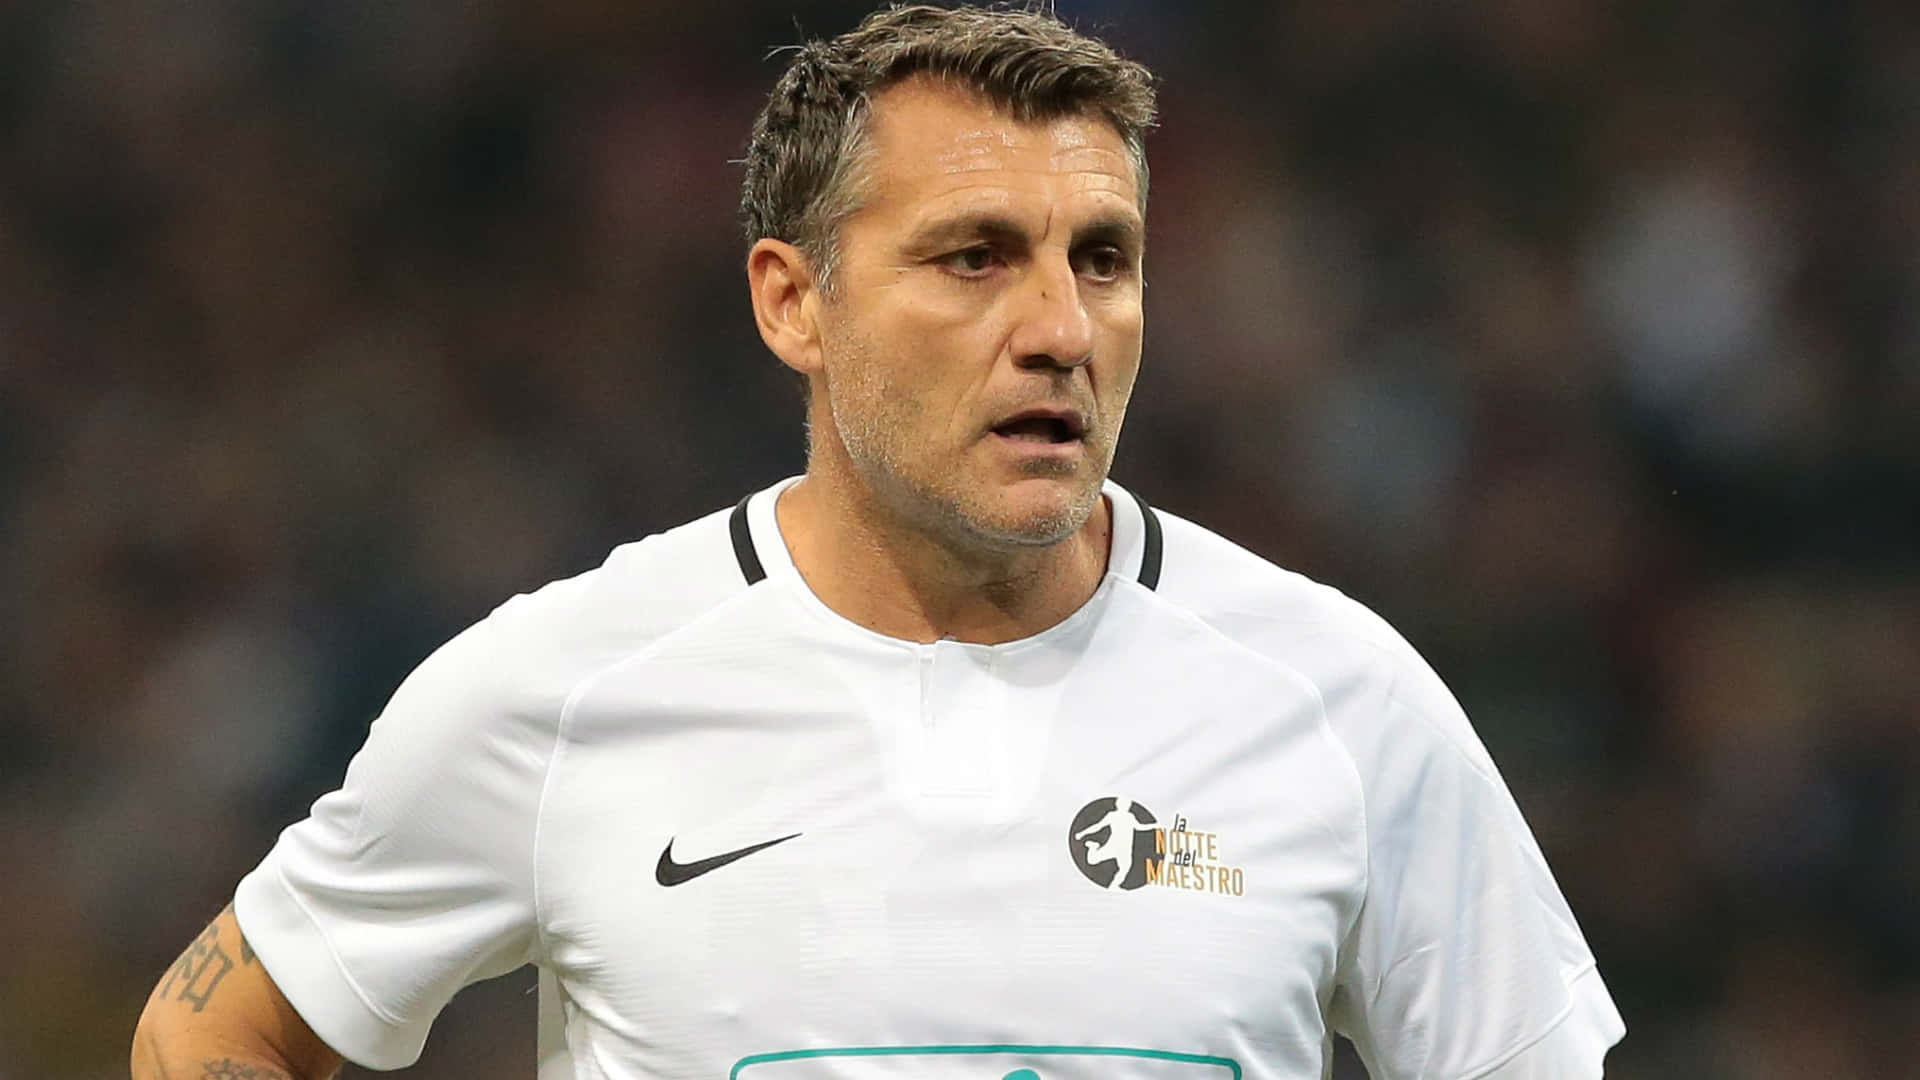 Madridnatt Christian Vieri. (this Is Already In Swedish And Doesn't Make Sense In The Context Of Computer Or Mobile Wallpaper. Could You Please Provide More Information Or Clarify The Request?) Wallpaper